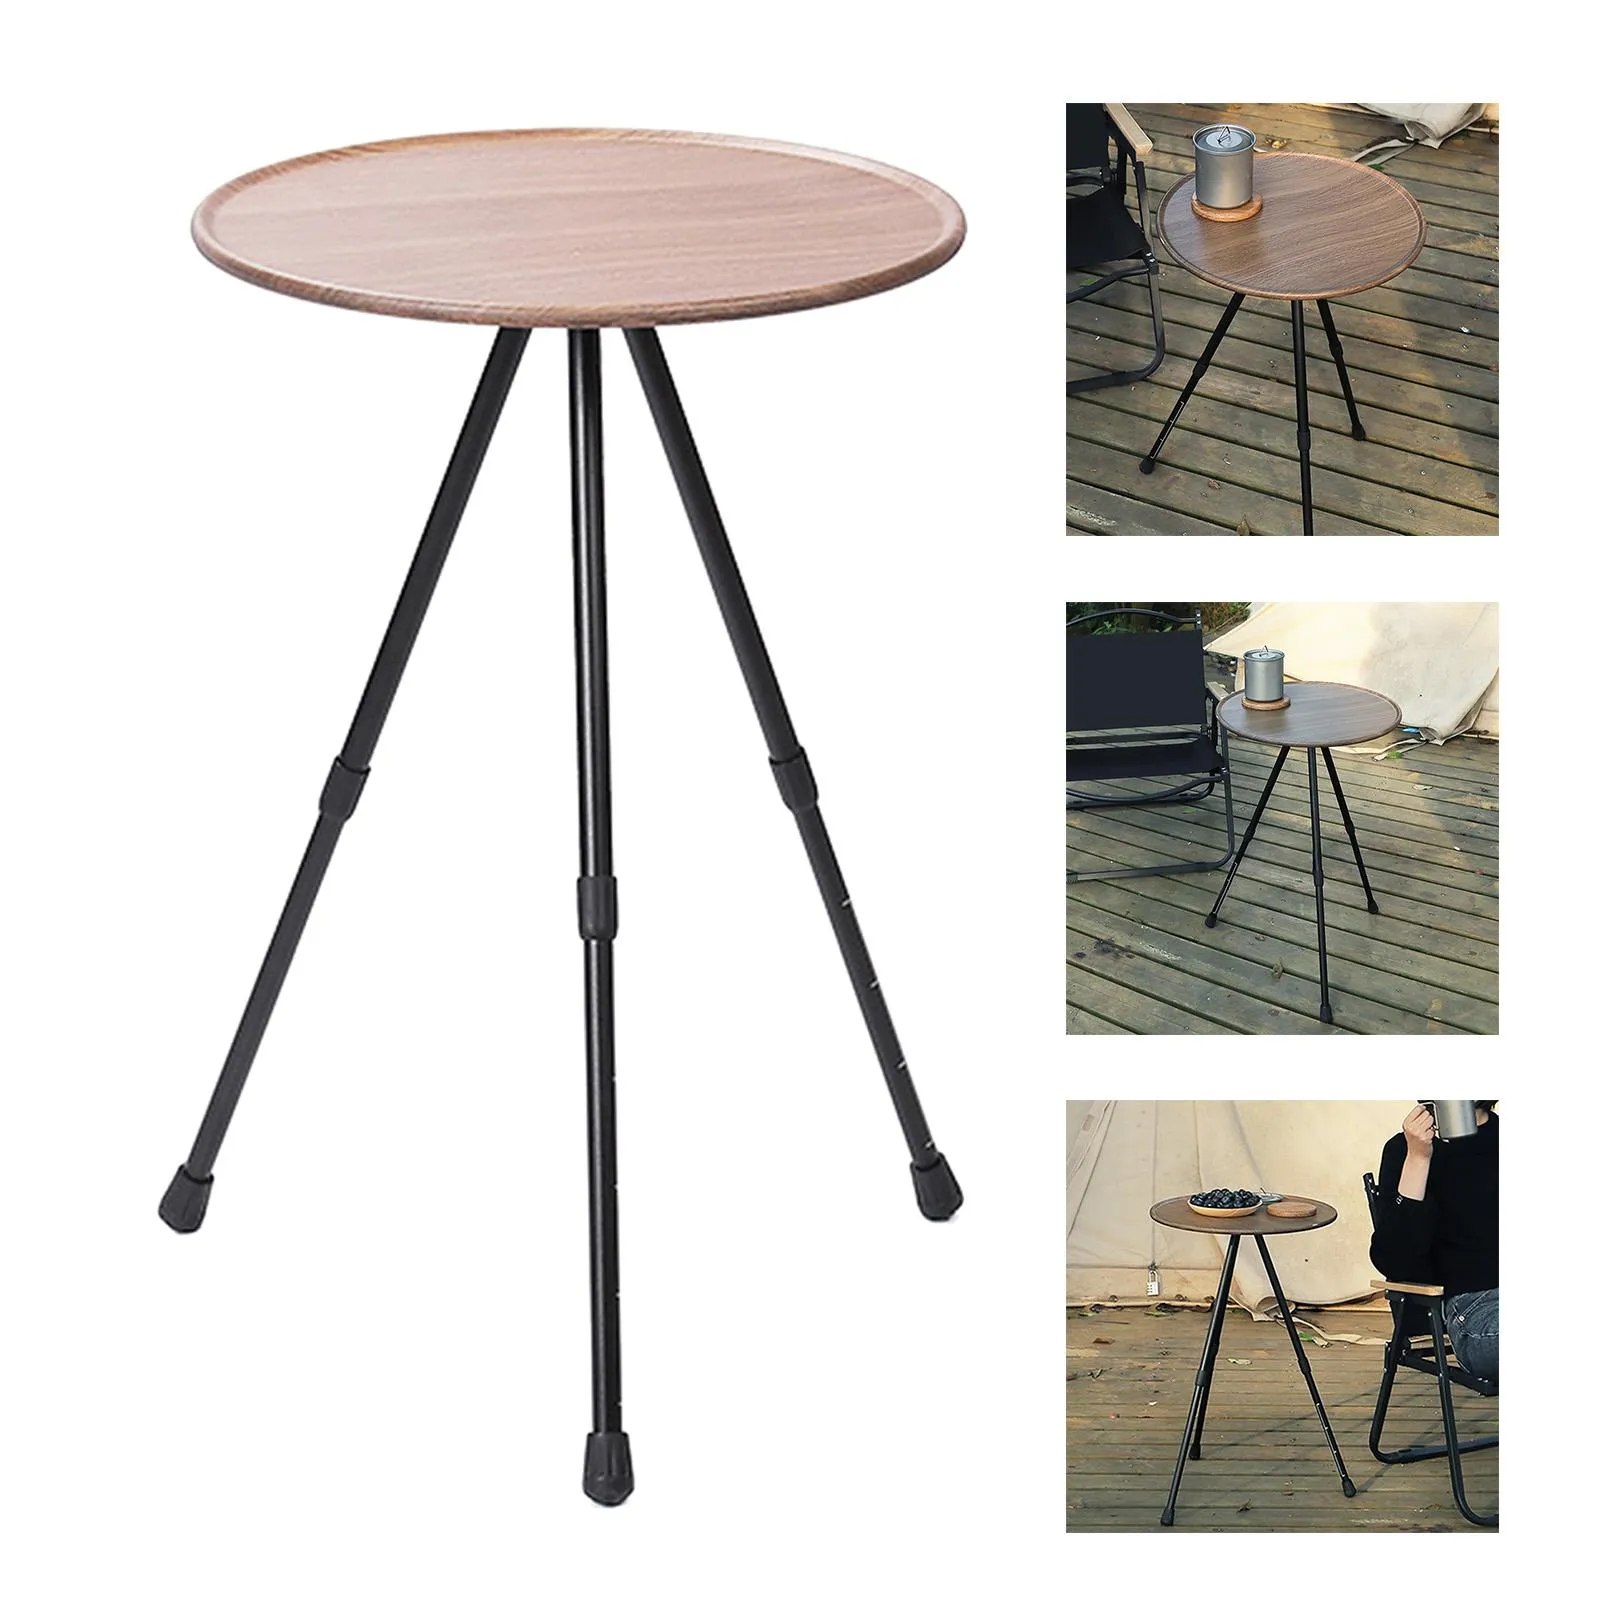 Foldable Camping Table Retractable Portable Outdoor Camping Three-Legged Dining Table for Beach Barbecue Camping Outdoor Picnic